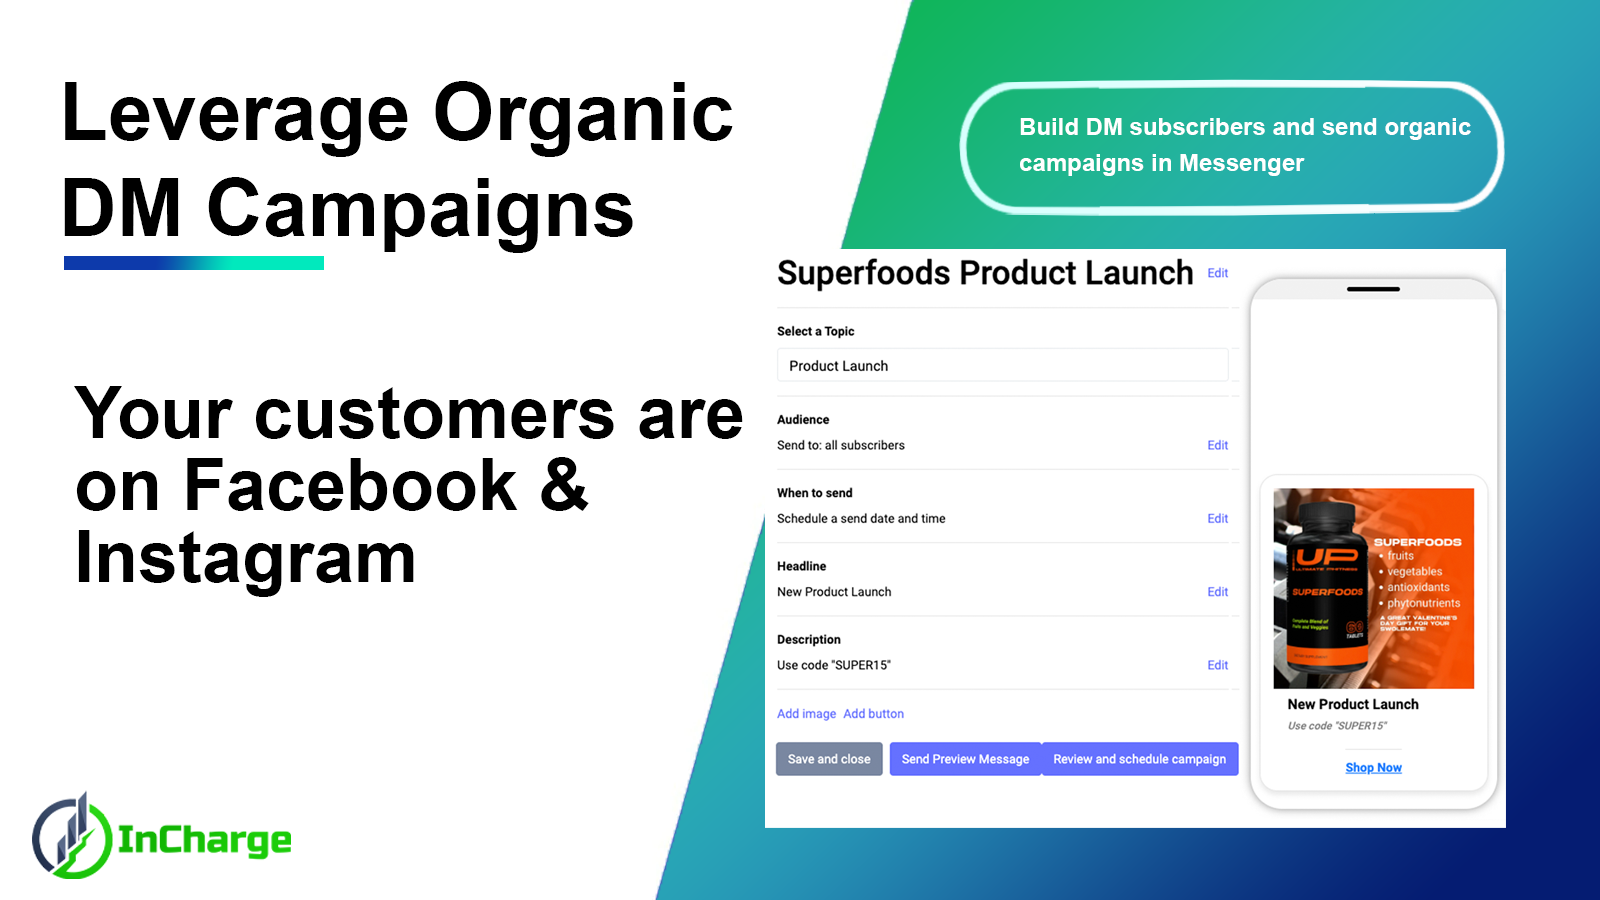 Build DM Subscribers & Send Organic Campaigns